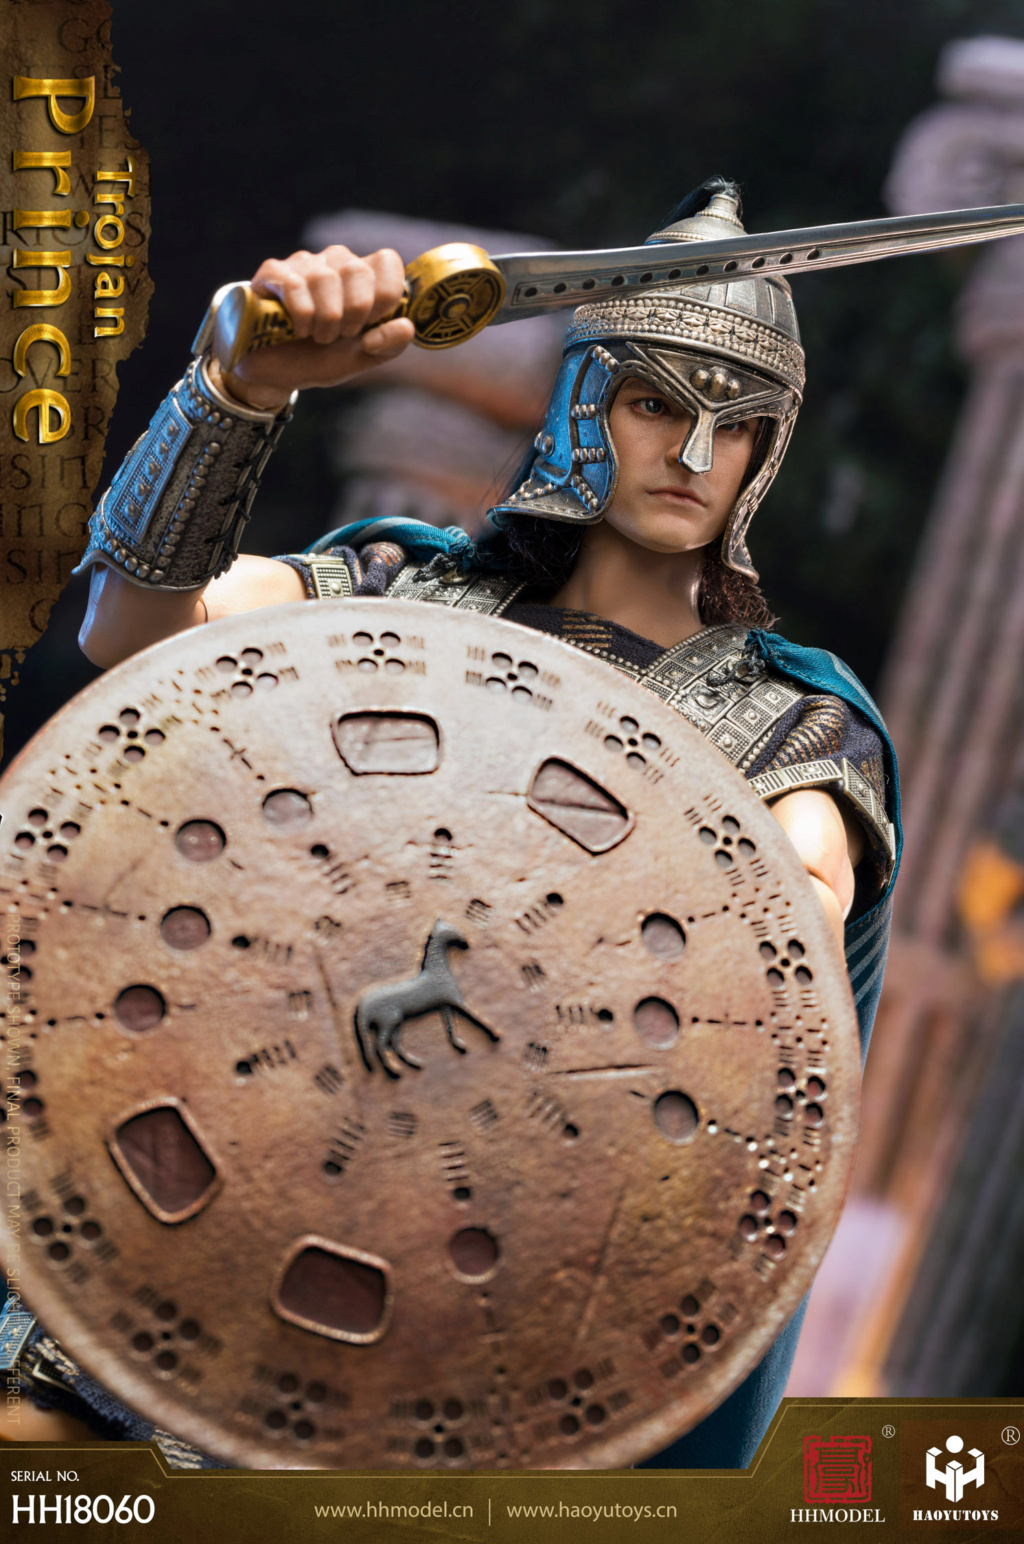 hhmodel - NEW PRODUCT: HHMODEL & HAOYUTOYS: 1/6 Empire Legion - Troy Prince Action Figure #HH18060 16281212